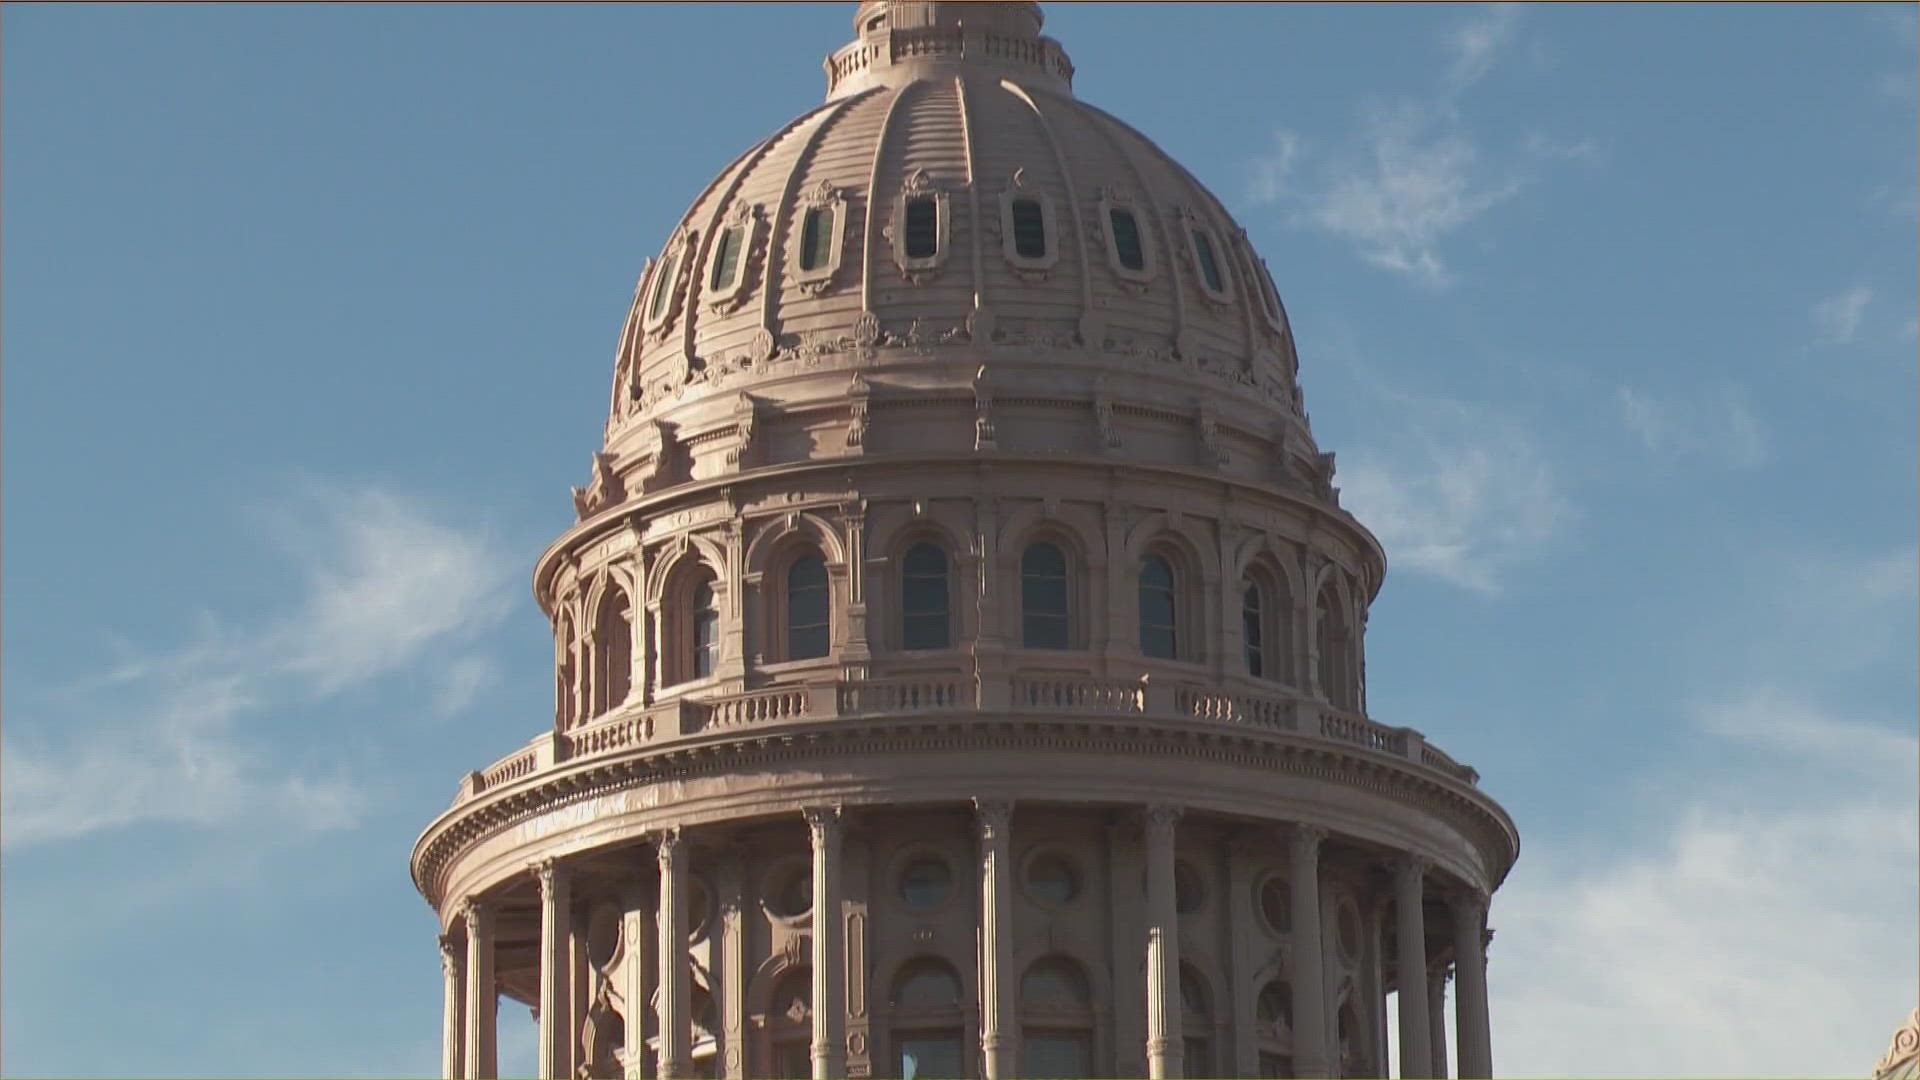 Lawmakers have until March 10 to file any further bills for this session. All of these bills target multiple topics that cover hot topics like the grid and abortion.